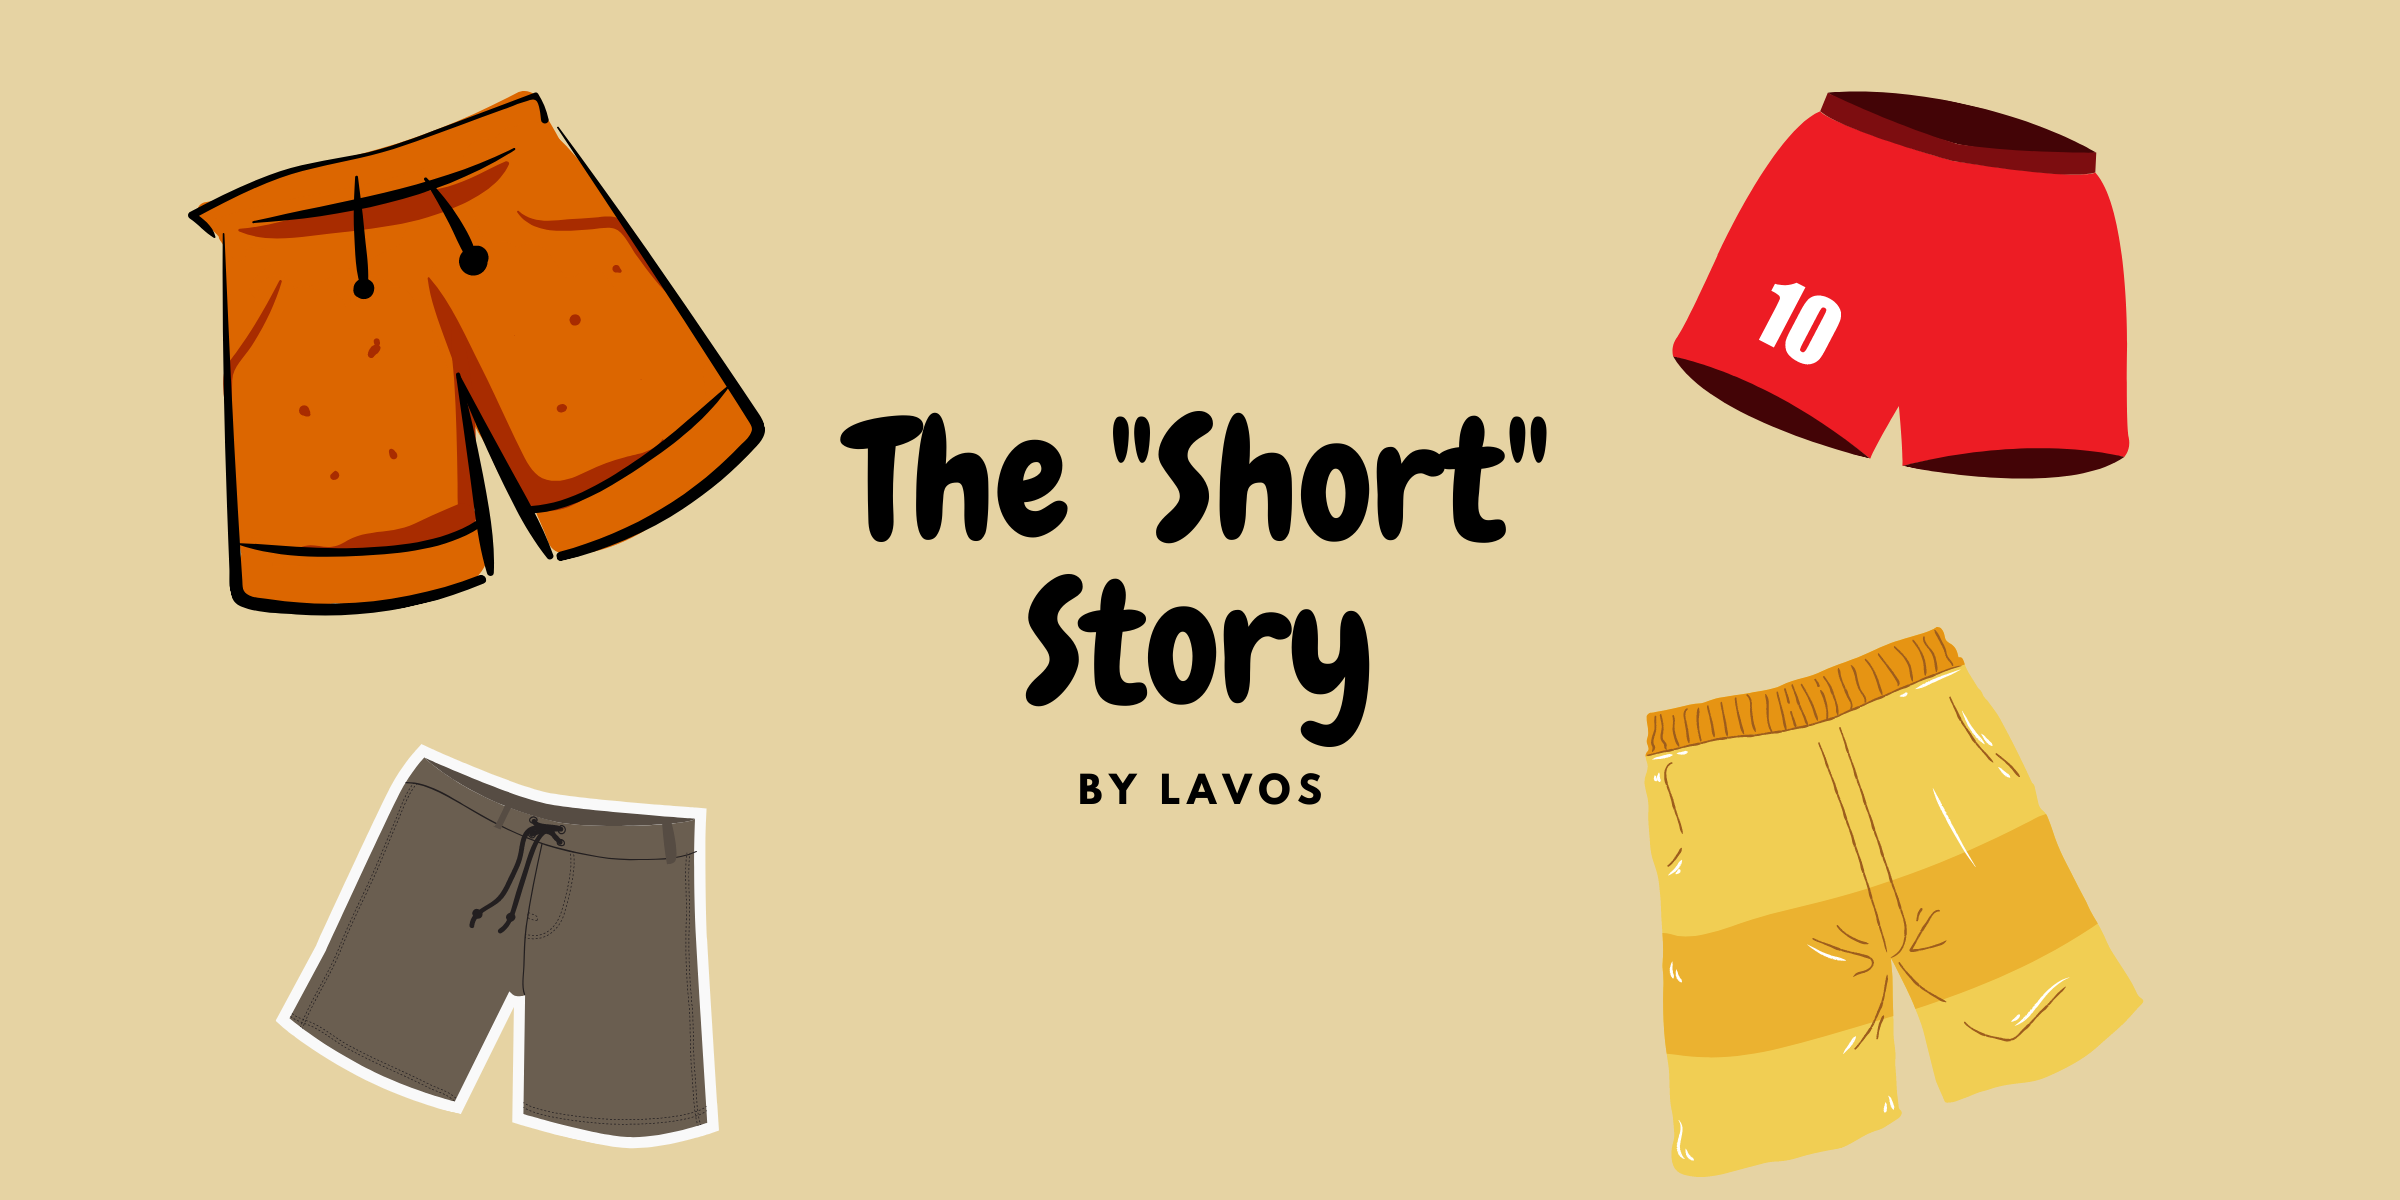 Lavos Performance writes about the importance of different Shorts